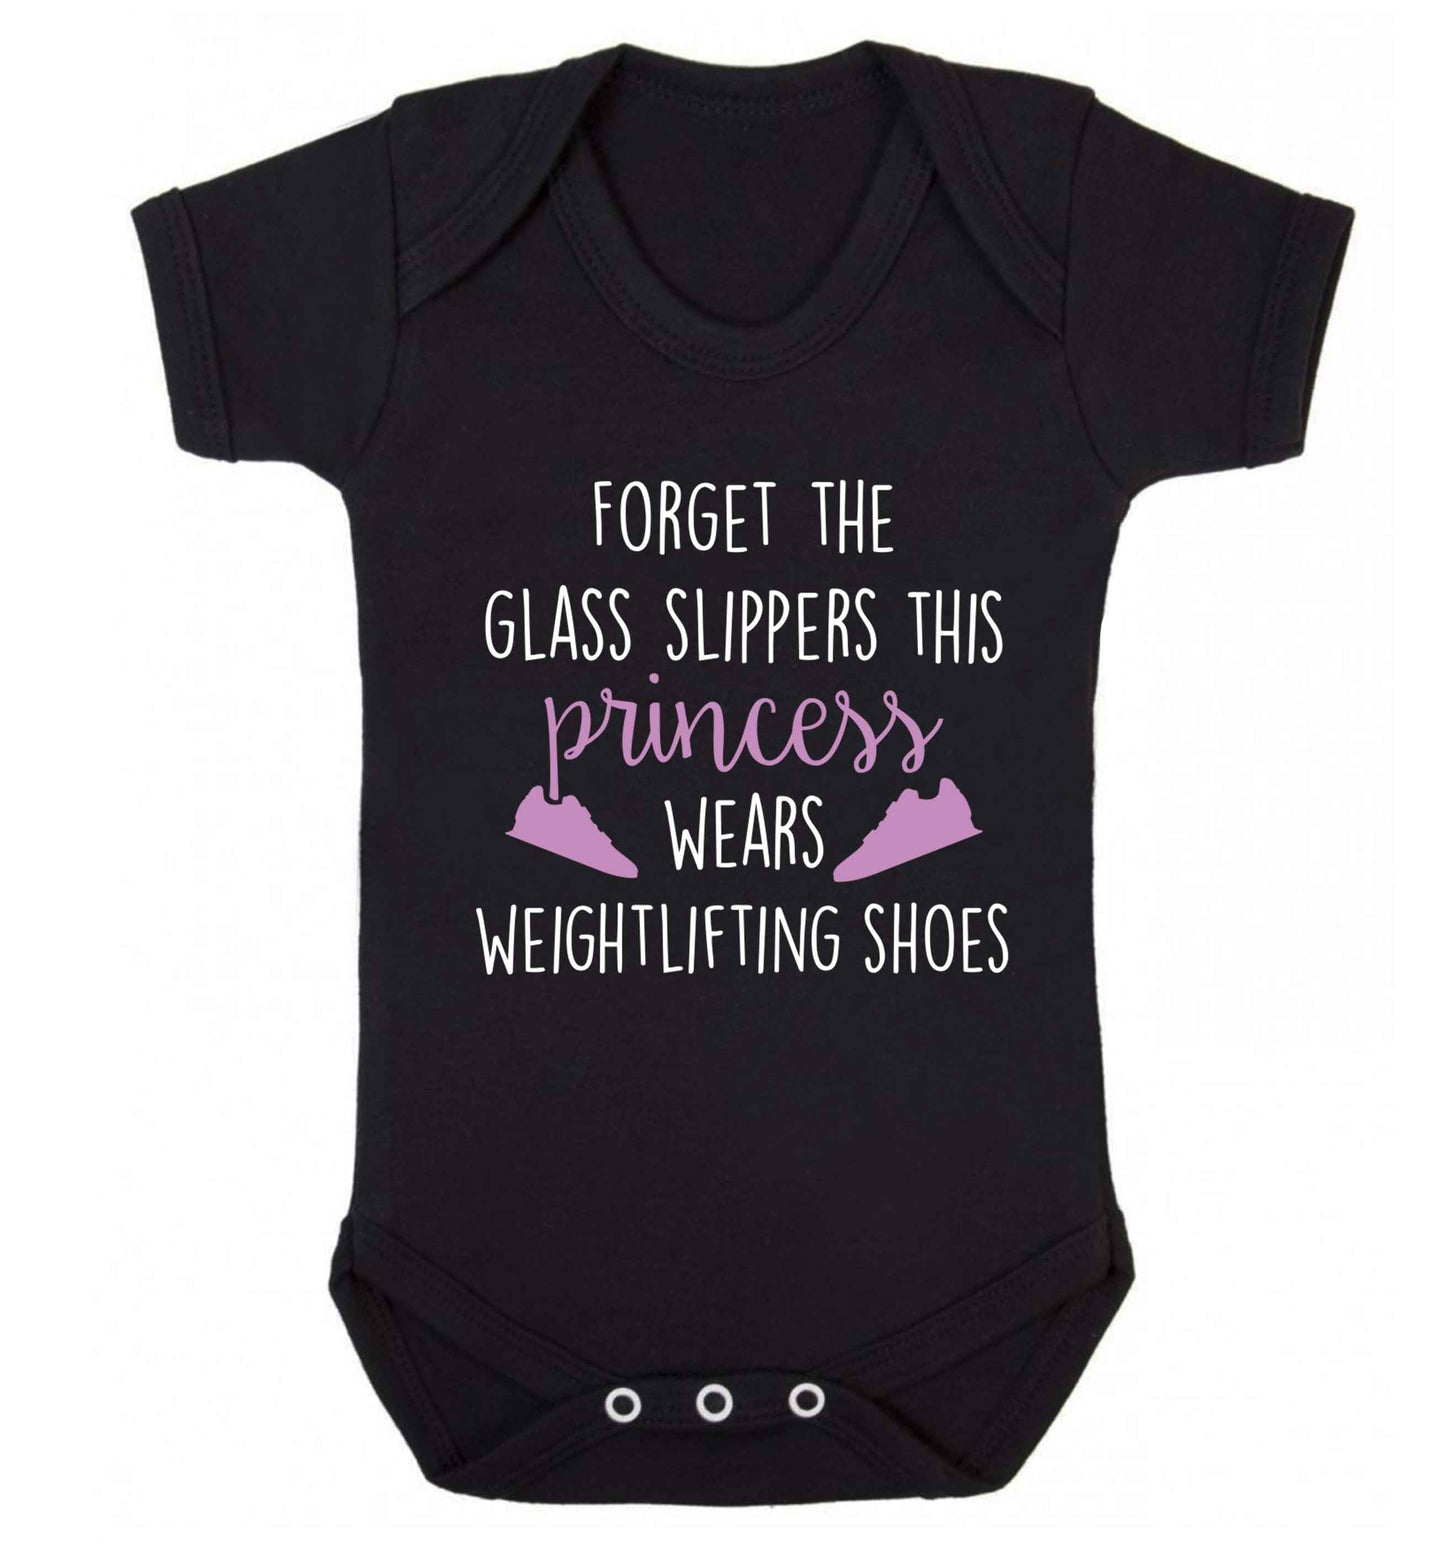 Forget the glass slippers this princess wears weightlifting shoes Baby Vest black 18-24 months